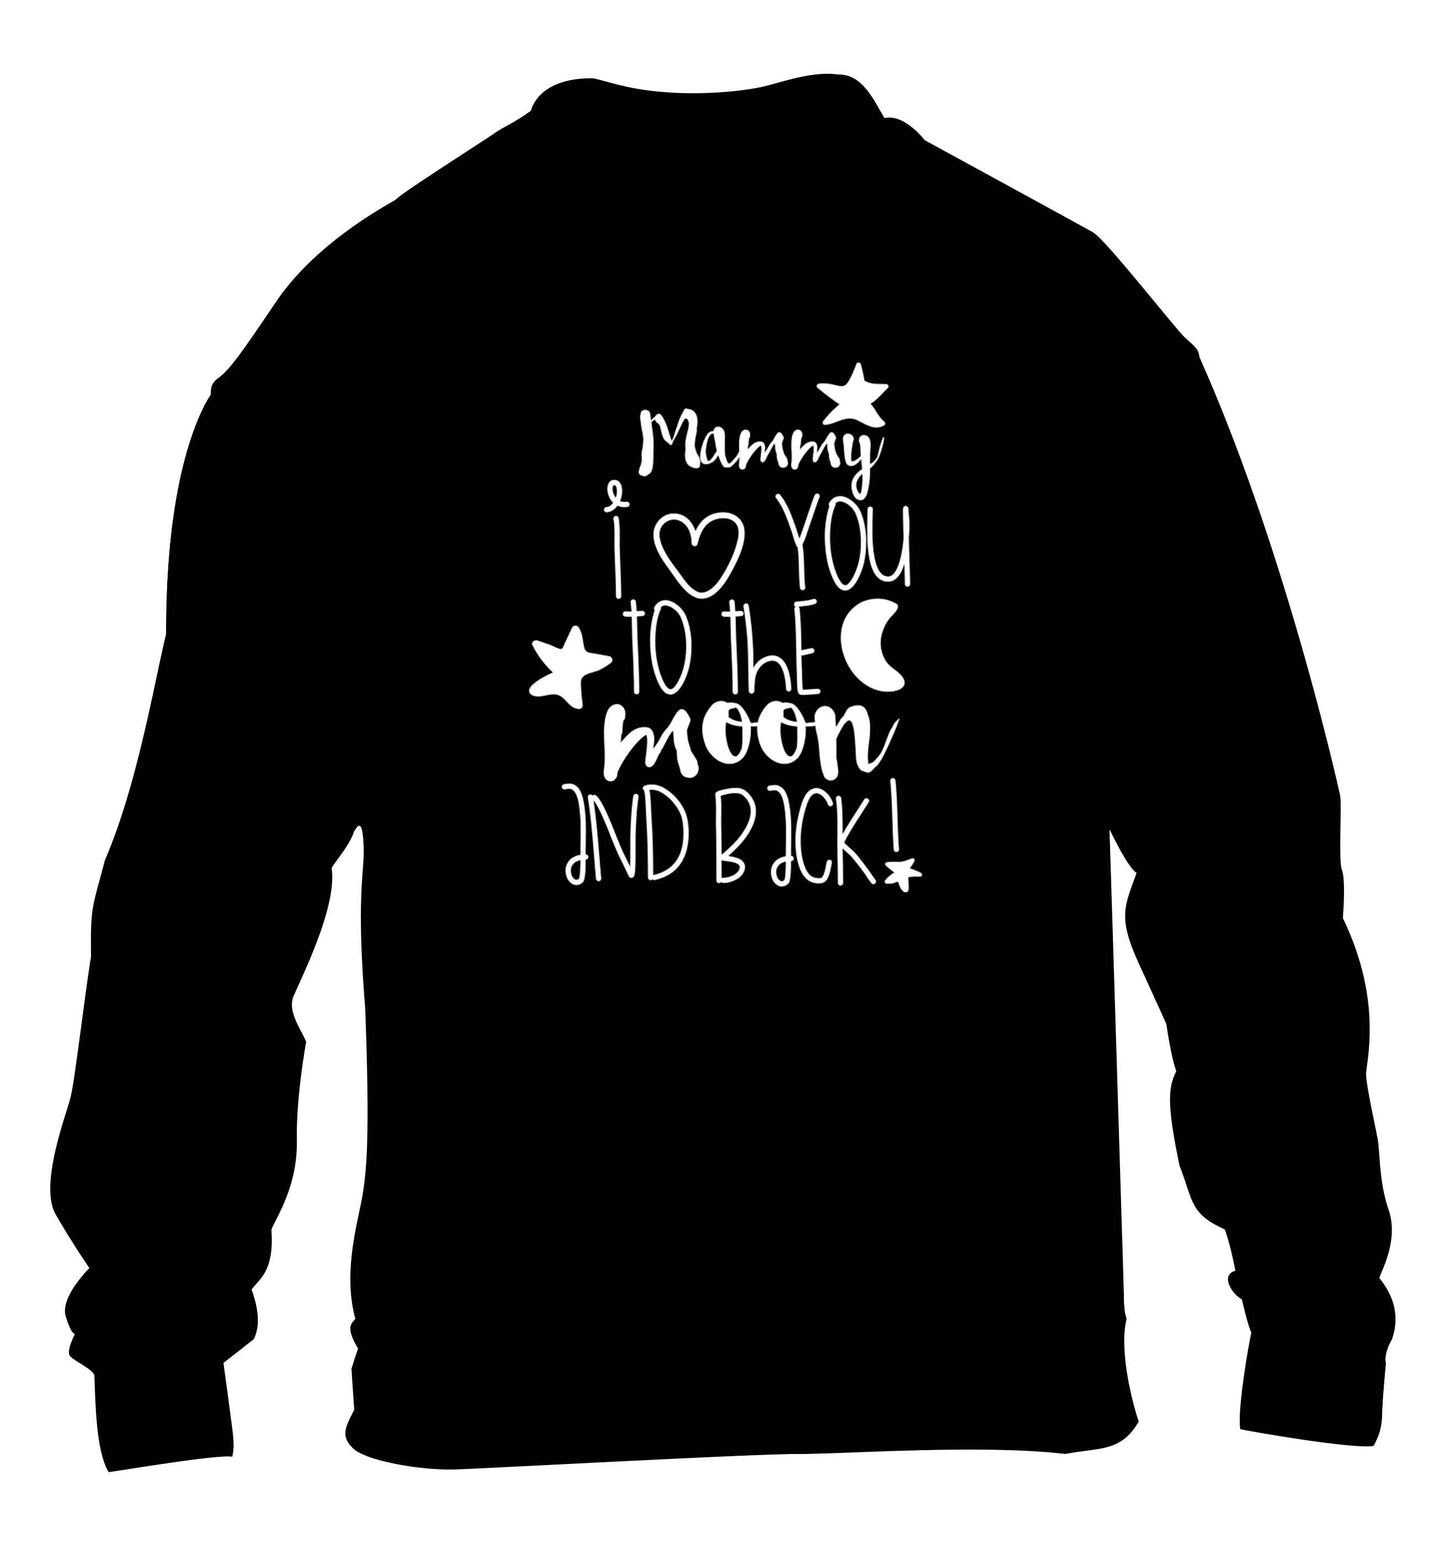 Mammy I love you to the moon and back children's black sweater 12-13 Years